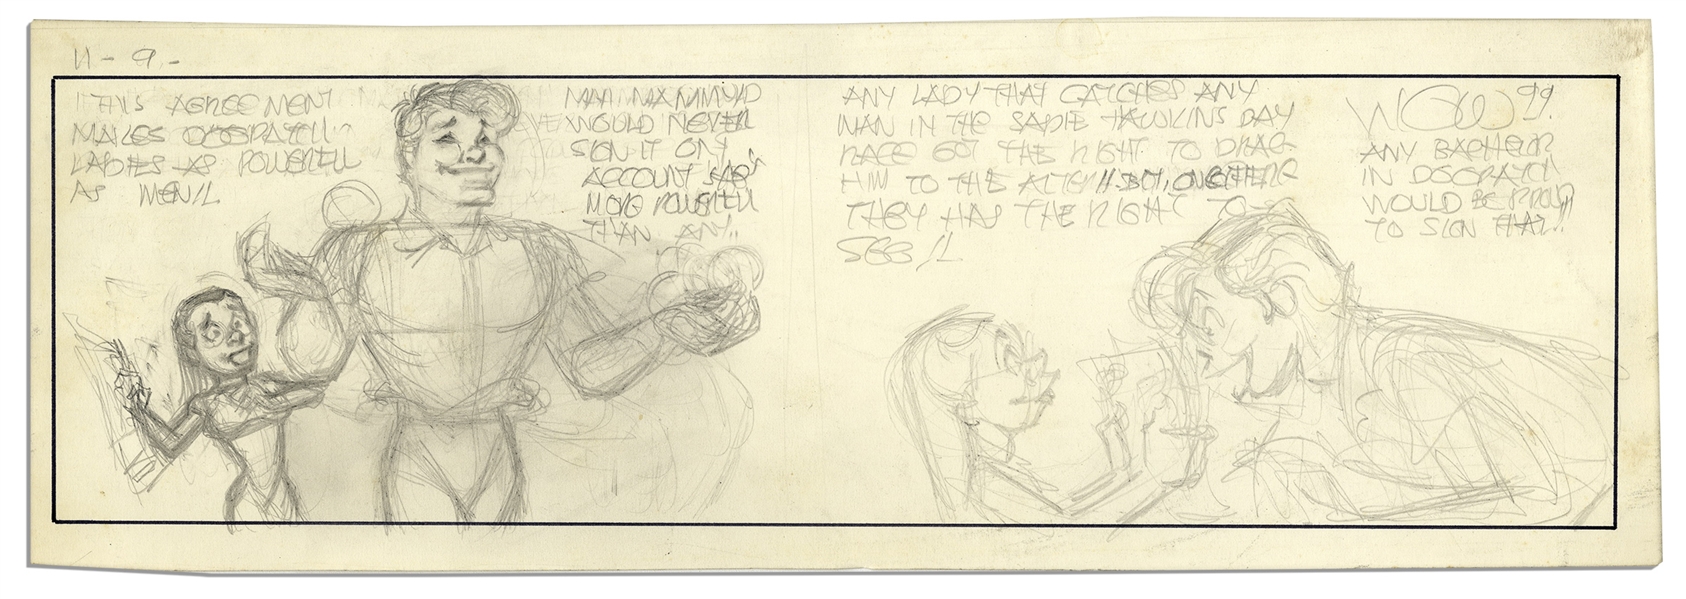 Al Capp ''Li'l Abner'' Unfinished Hand-Drawn Comic Strip -- Featuring Li'l Abner & With a Mention of Sadie Hawkins Day -- 18.75'' x 6.25'' in Pencil -- Very Good -- From the Al Capp Estate